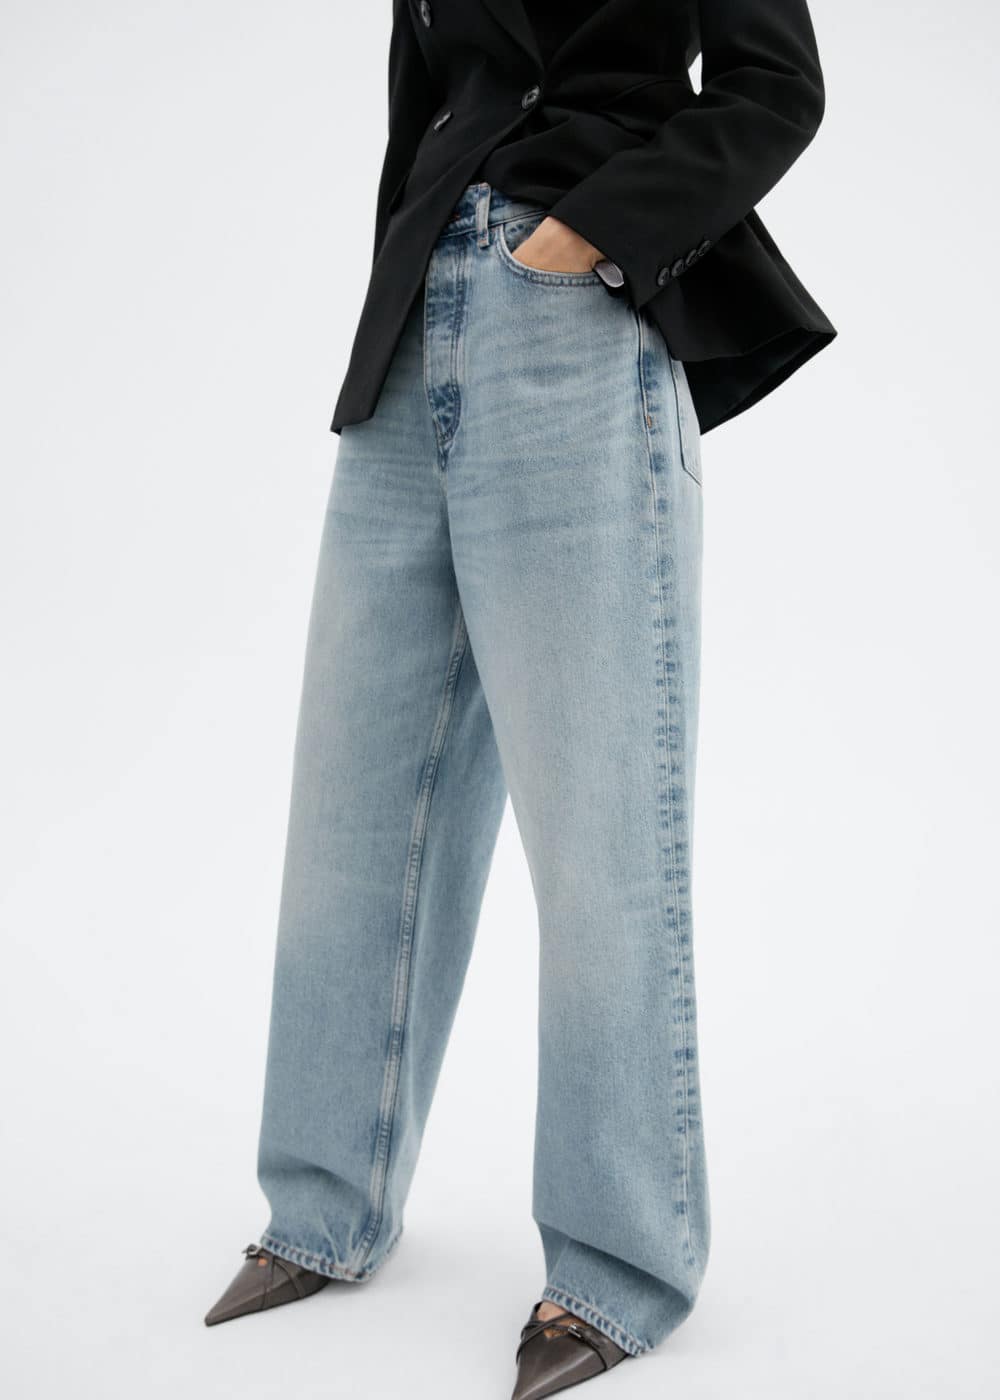 The 24 Best Wide-Leg Jeans to Shop This Season | Who What Wear